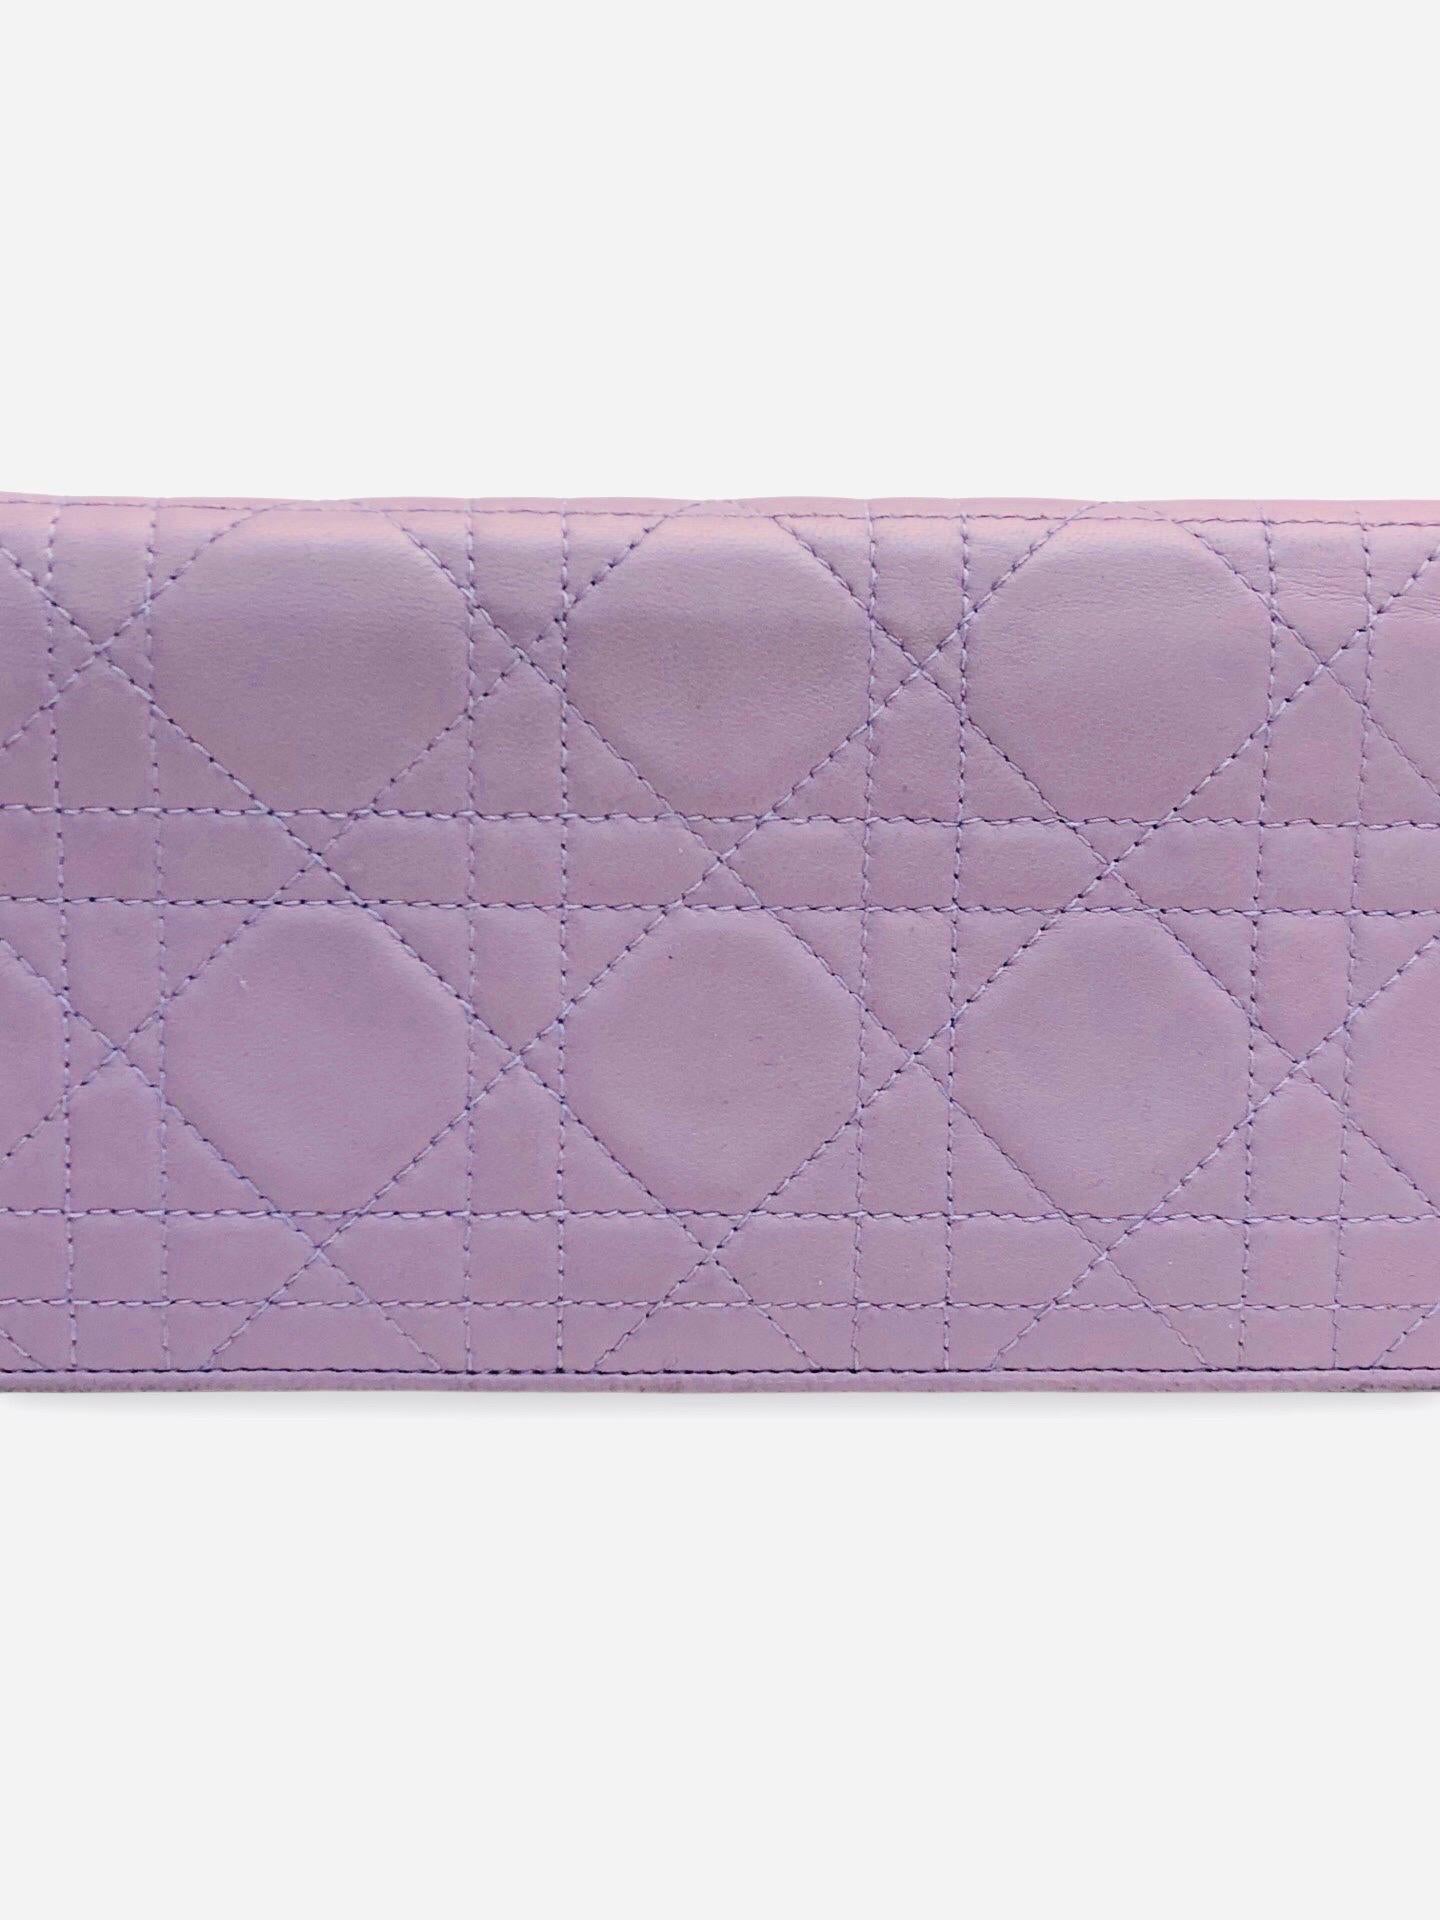 Christian Dior Purple Lambskin Leather Wallet In Excellent Condition For Sale In Sheung Wan, HK